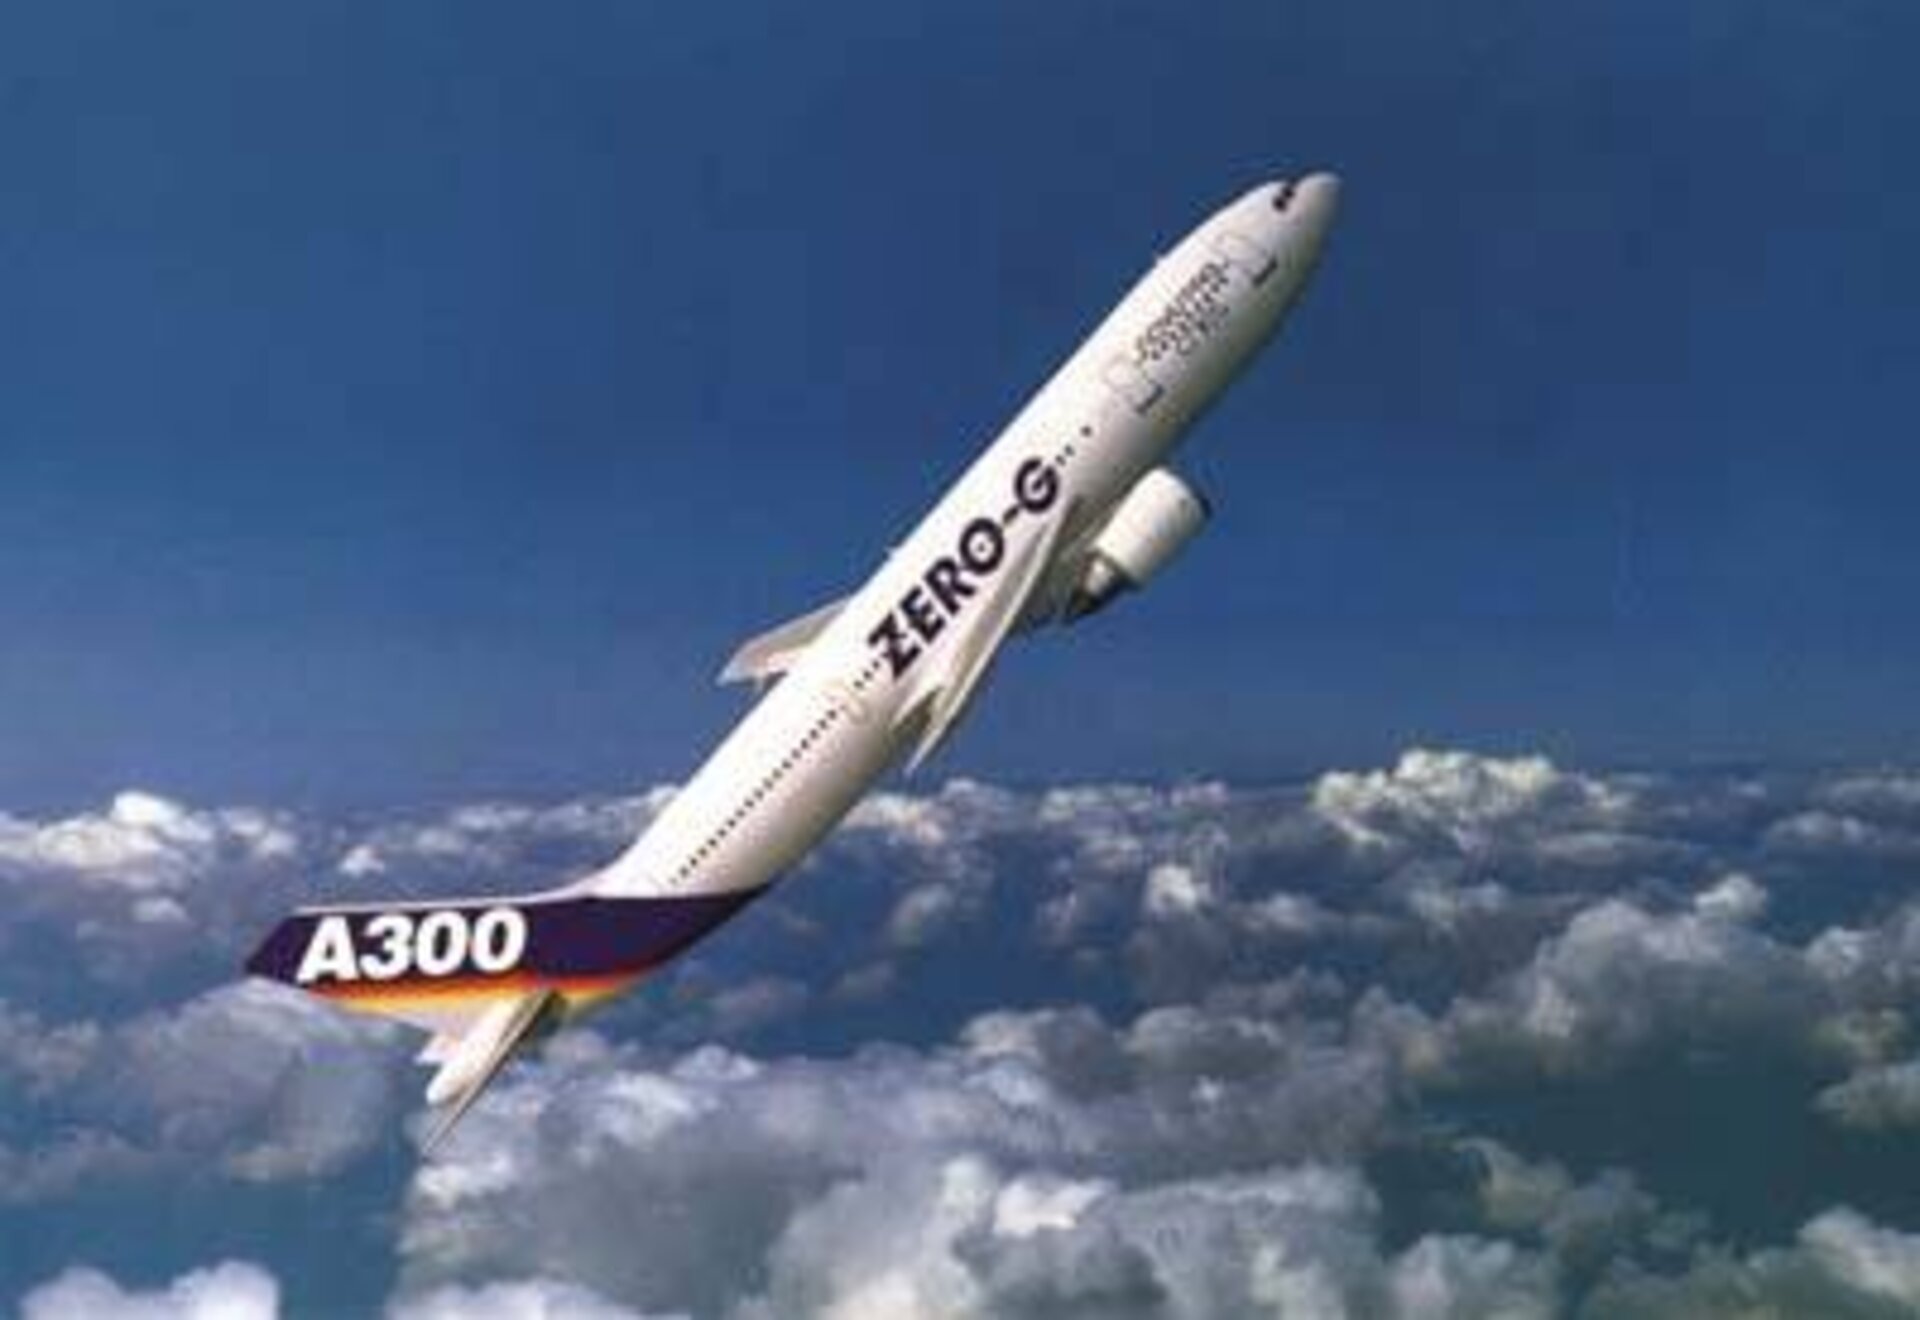 The specially adapted 'Zero-G' A-300 Airbus